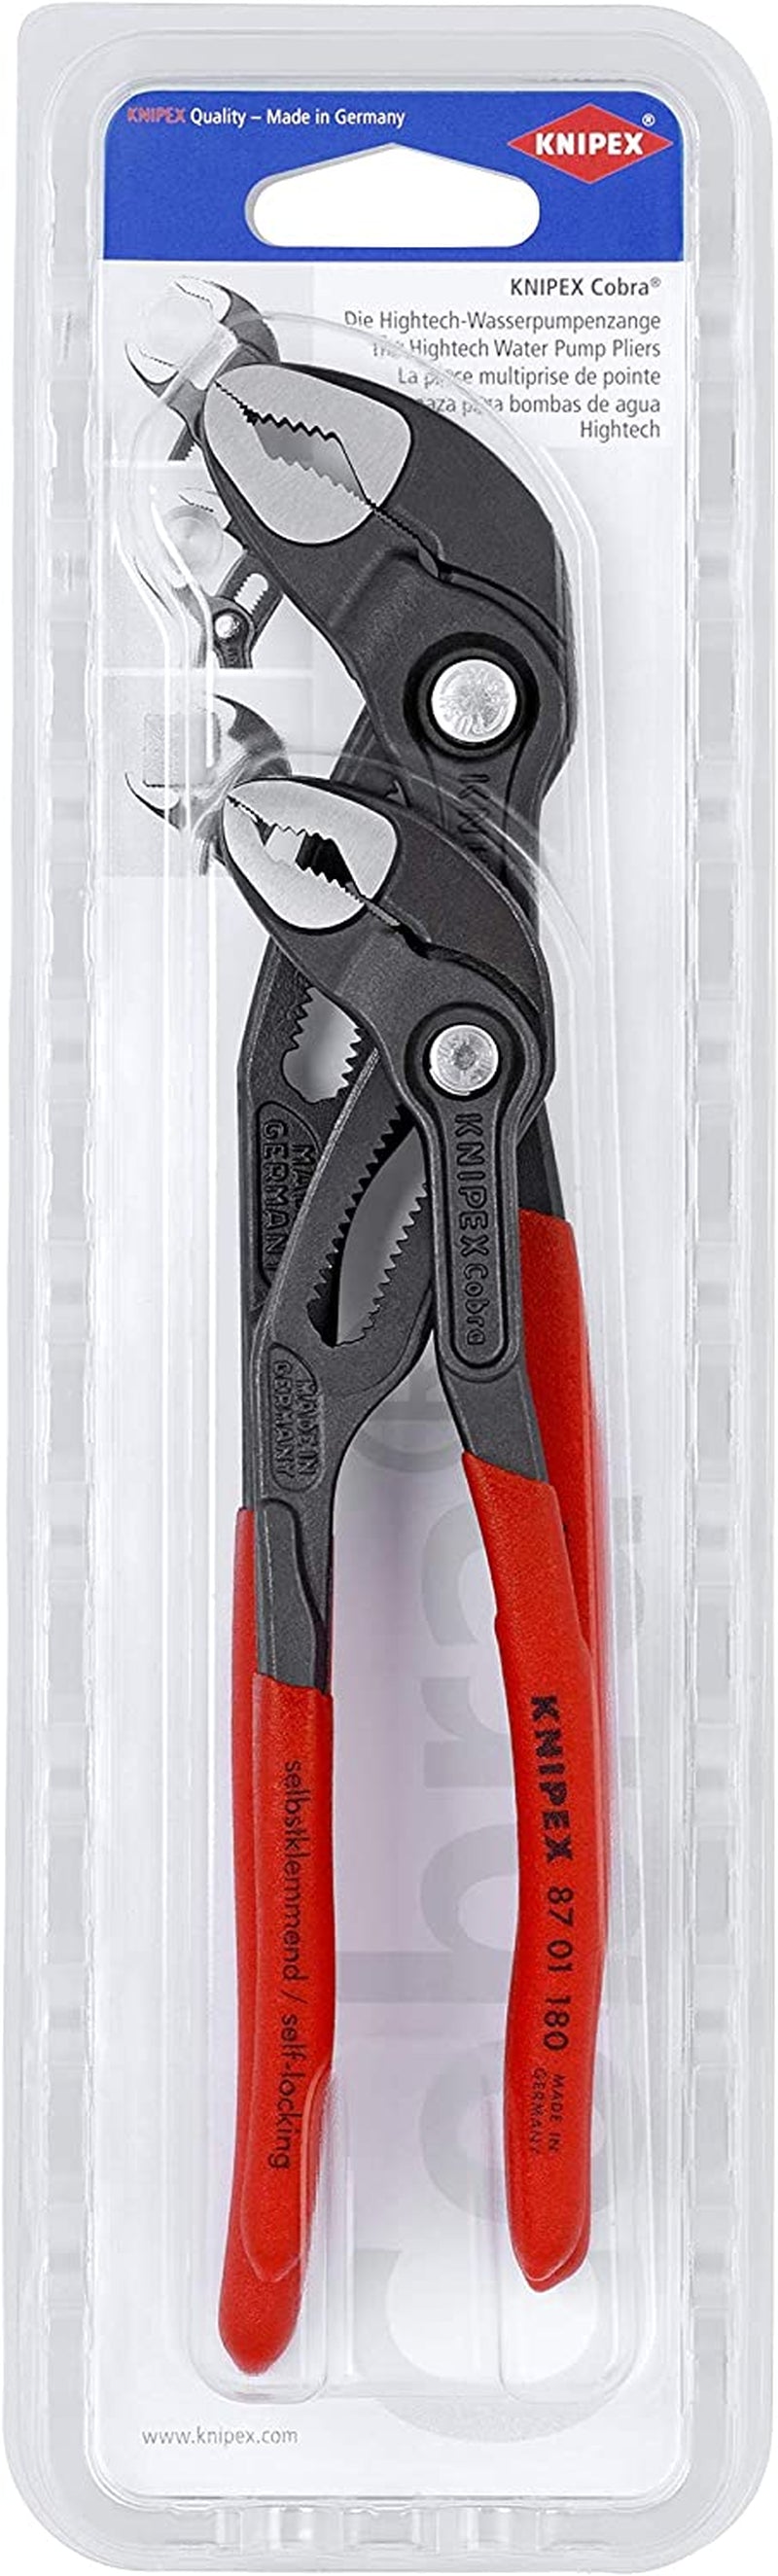 KNIPEX, Knipex 00 31 20 V01 Set of Pliers